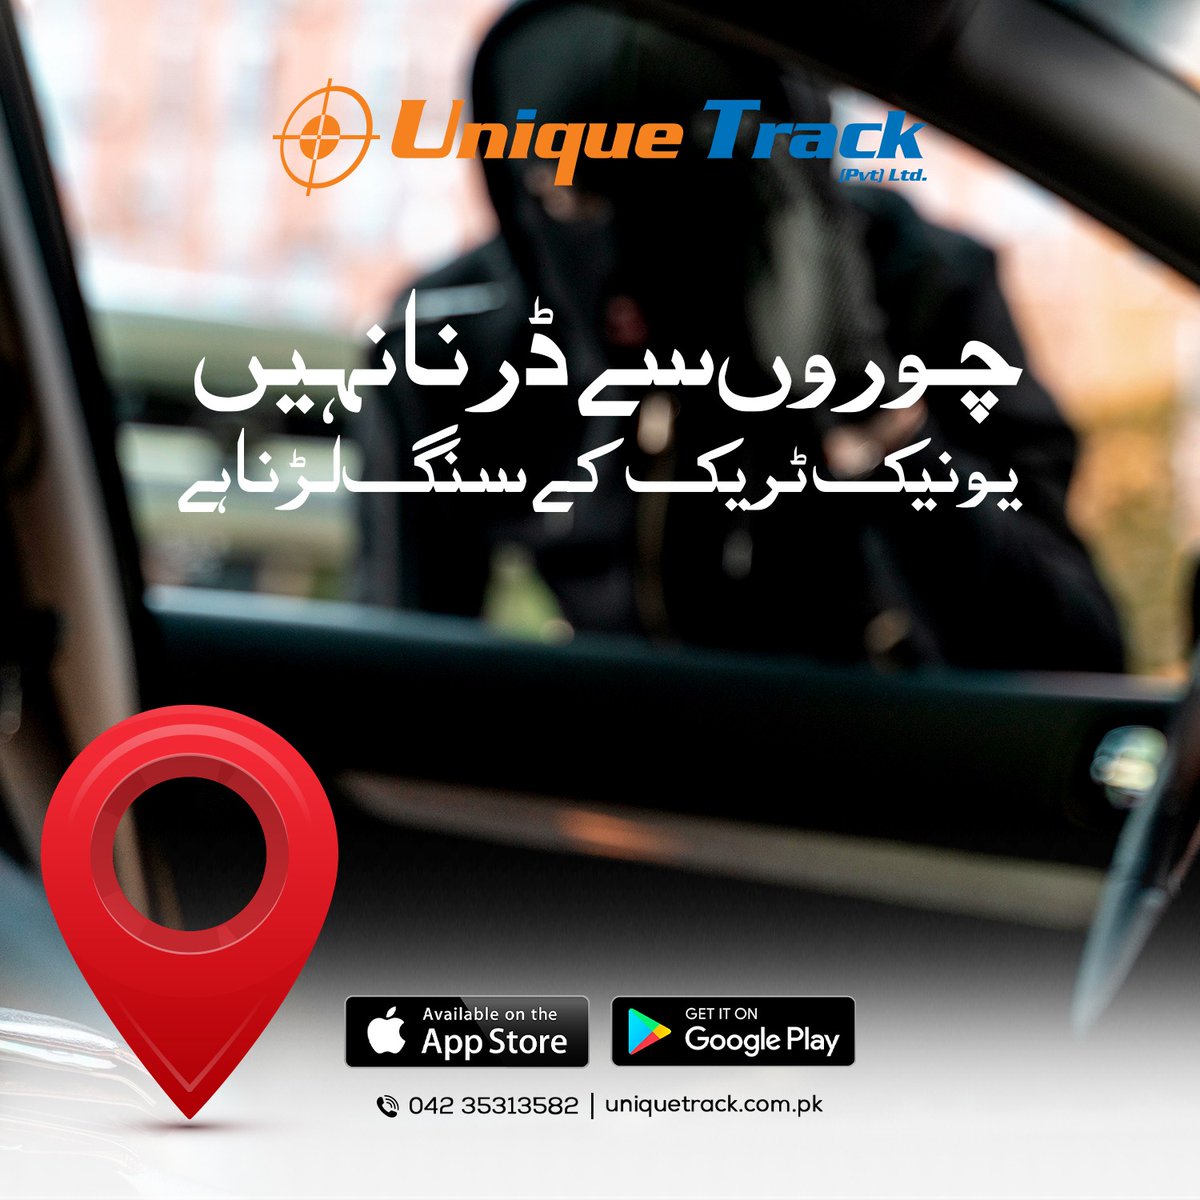 In a world where vehicle theft is a concern, fear no more with Unique Track by your side.
📱 : 03234444434
🌐 : uniquetrack.com.pk
#UniqueTrack #FightThieves #VehicleSecurity #RealTimeTracking #PeaceOfMind #InnovativeTechnology #CombatThieves #ChooseUniqueTrack